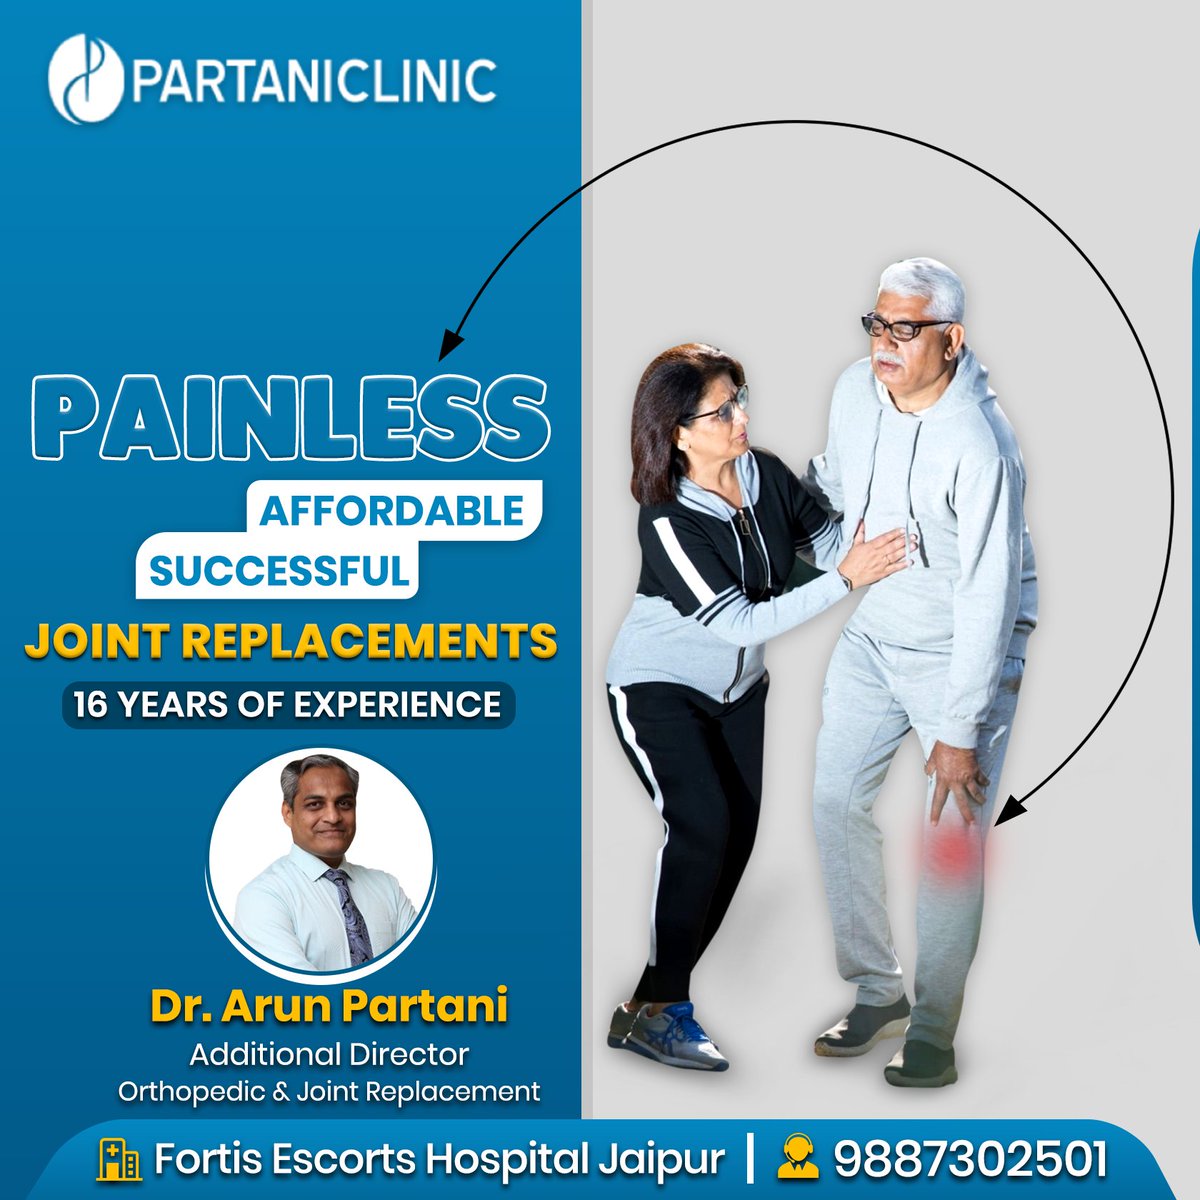 PAINLESS
AFFORDABLE
SUCCESSFUL
JOINT REPLACEMENTS!
Meet our expert today
Call at- 9680902501, 9887302501

#shoulderarthroscopy #hipreplacement #revisionkneereplacement #kneerevisionsurgery #arthritis #kneearthritis #sportsInjuries #ACL #aclinjury #fasttrackkneereplacement